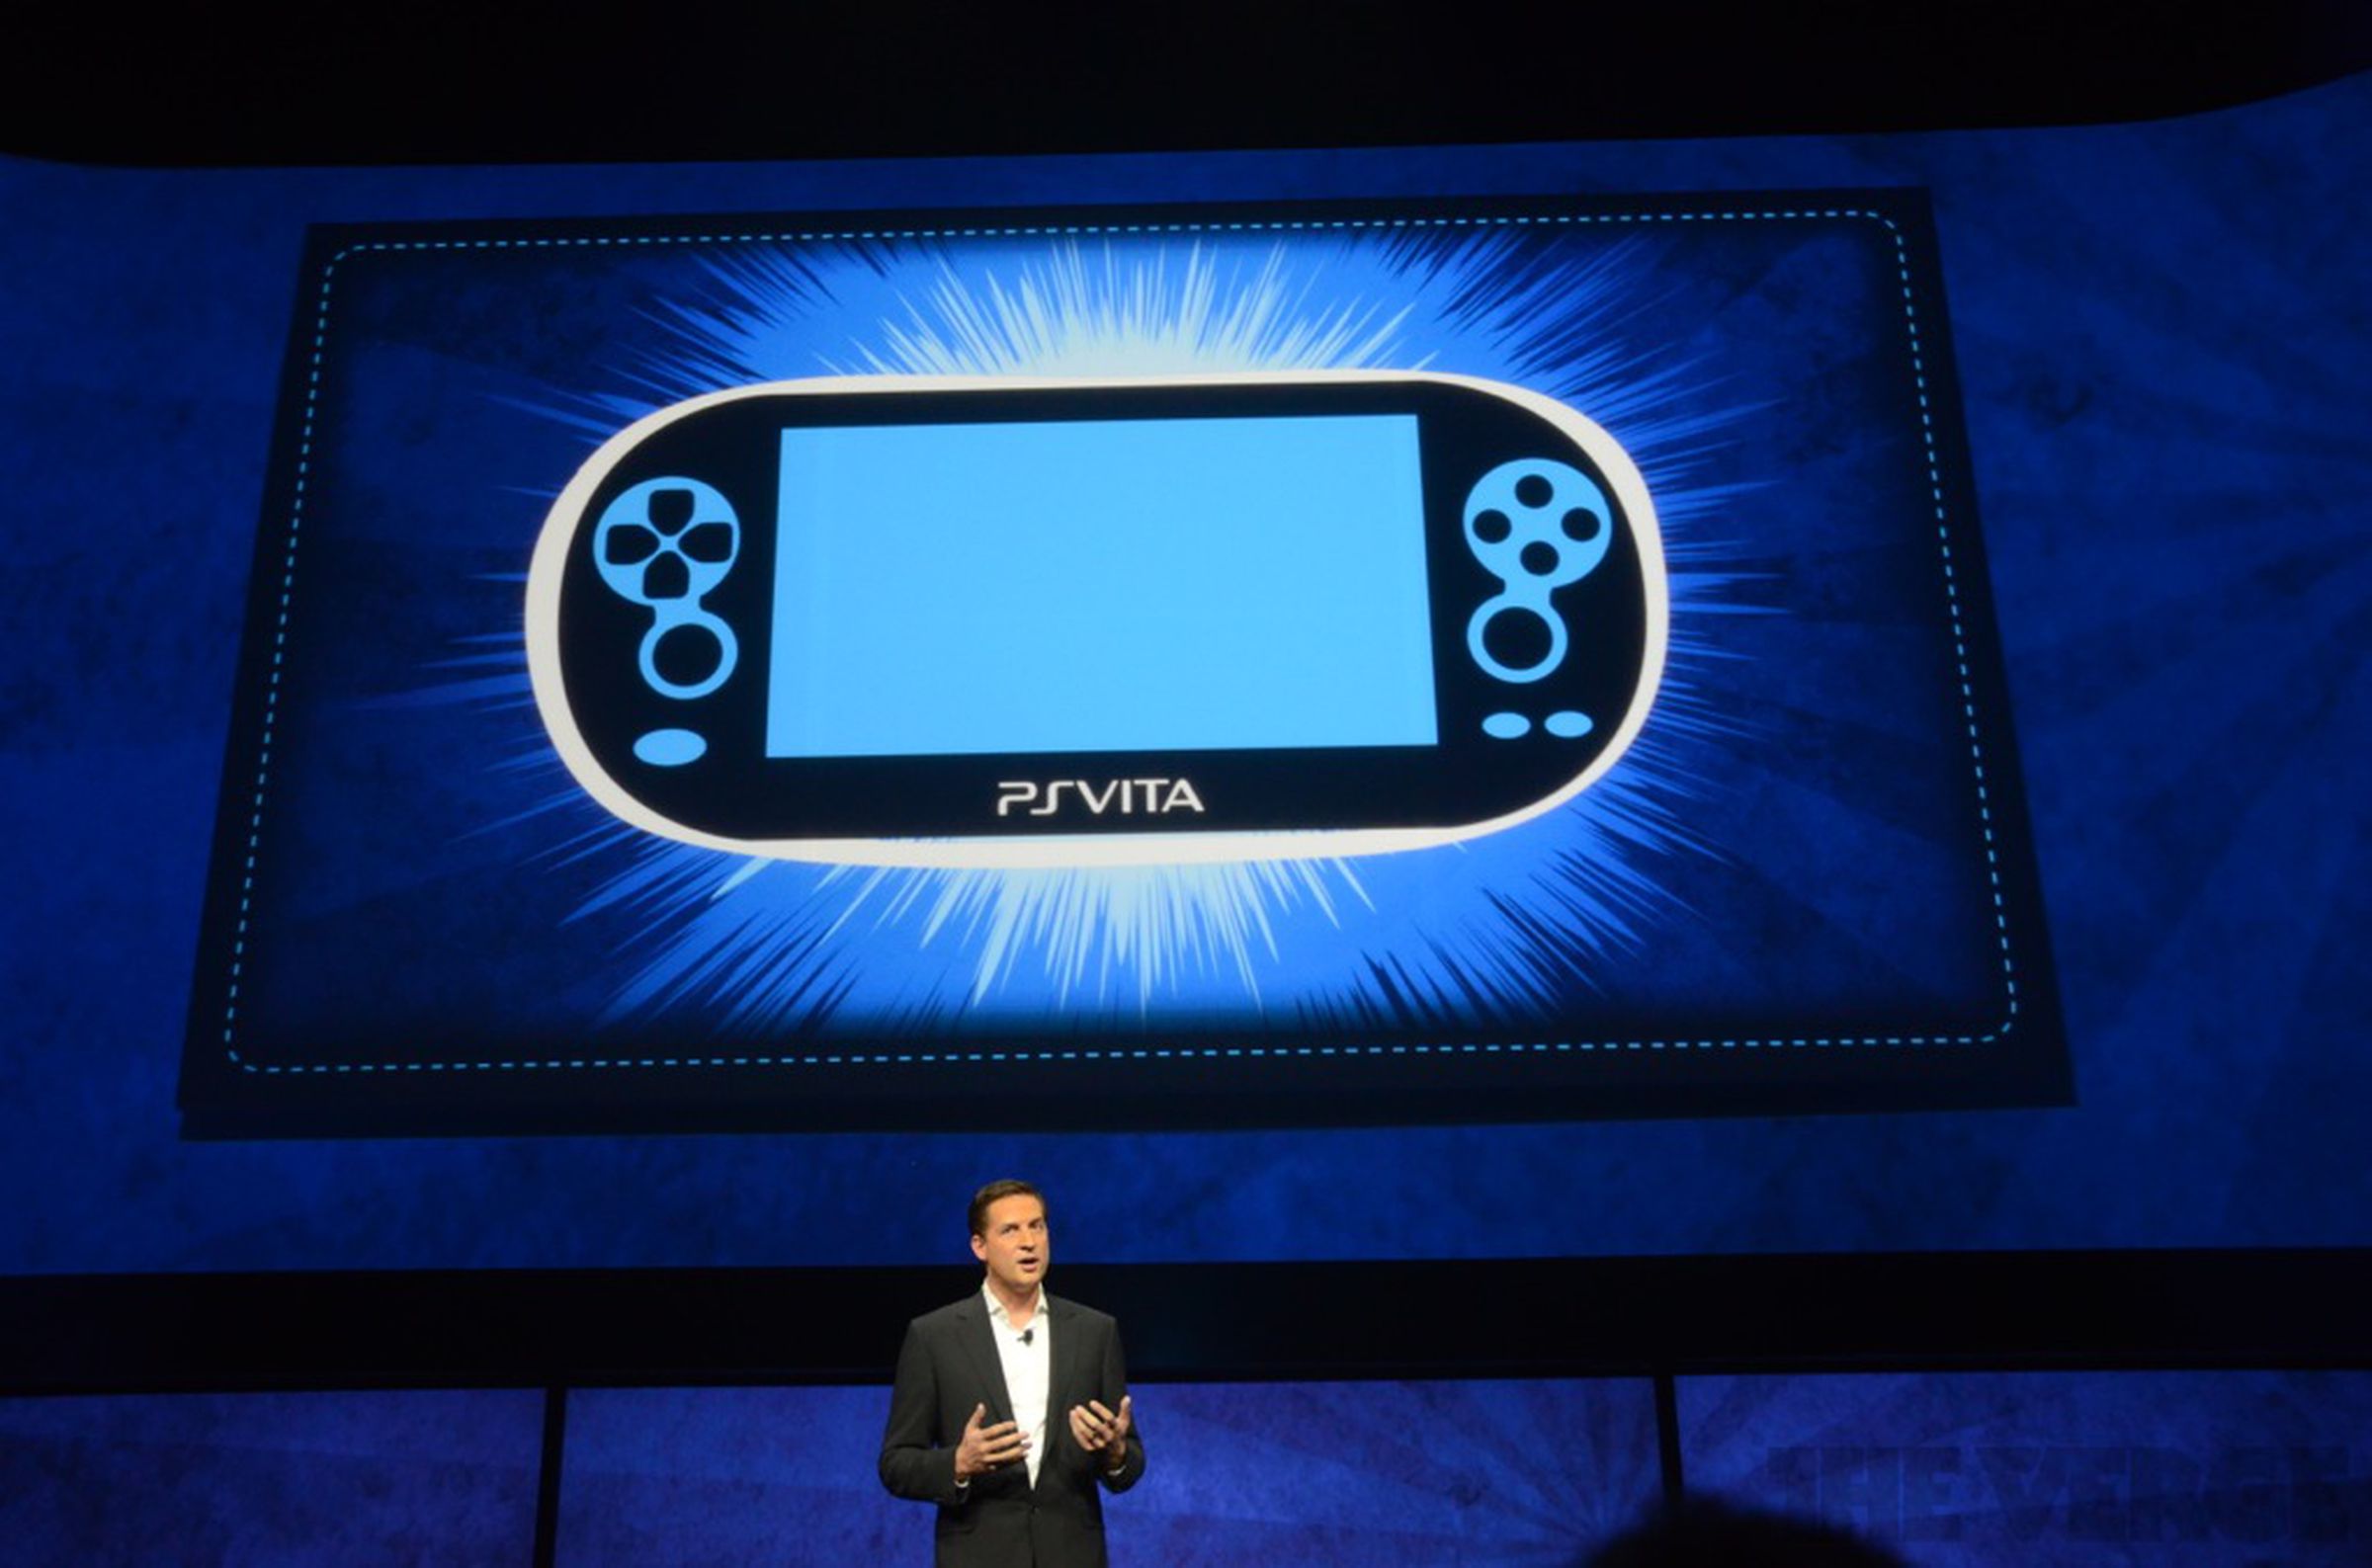 Sony PlayStation 4 remote play via PlayStation Vita pictures